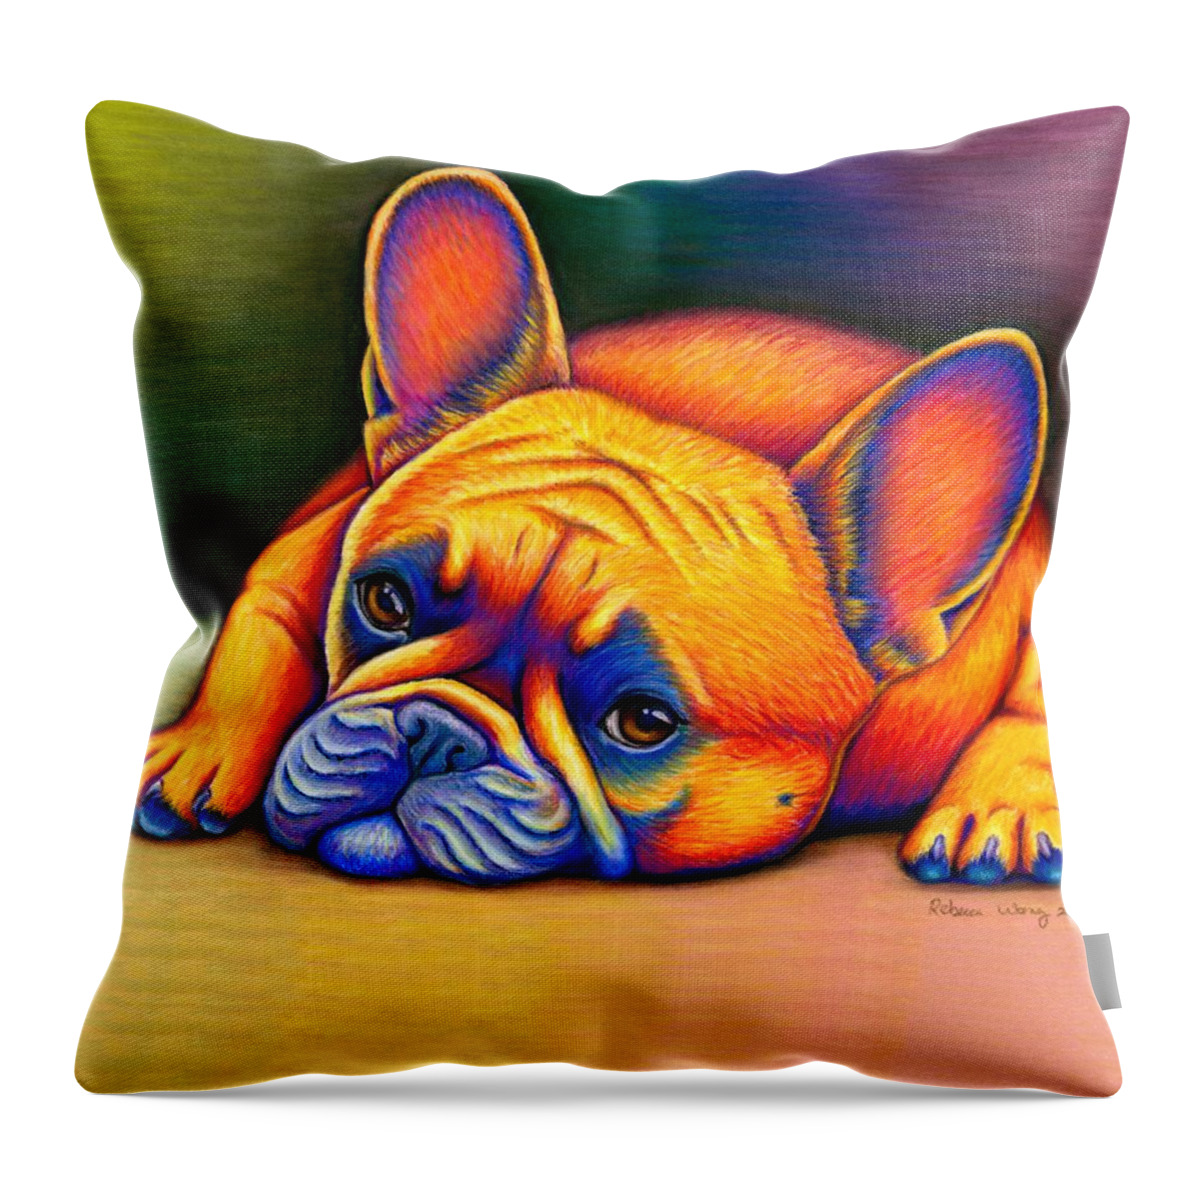 French Bulldog Throw Pillow featuring the drawing Daydreamer - Colorful French Bulldog by Rebecca Wang